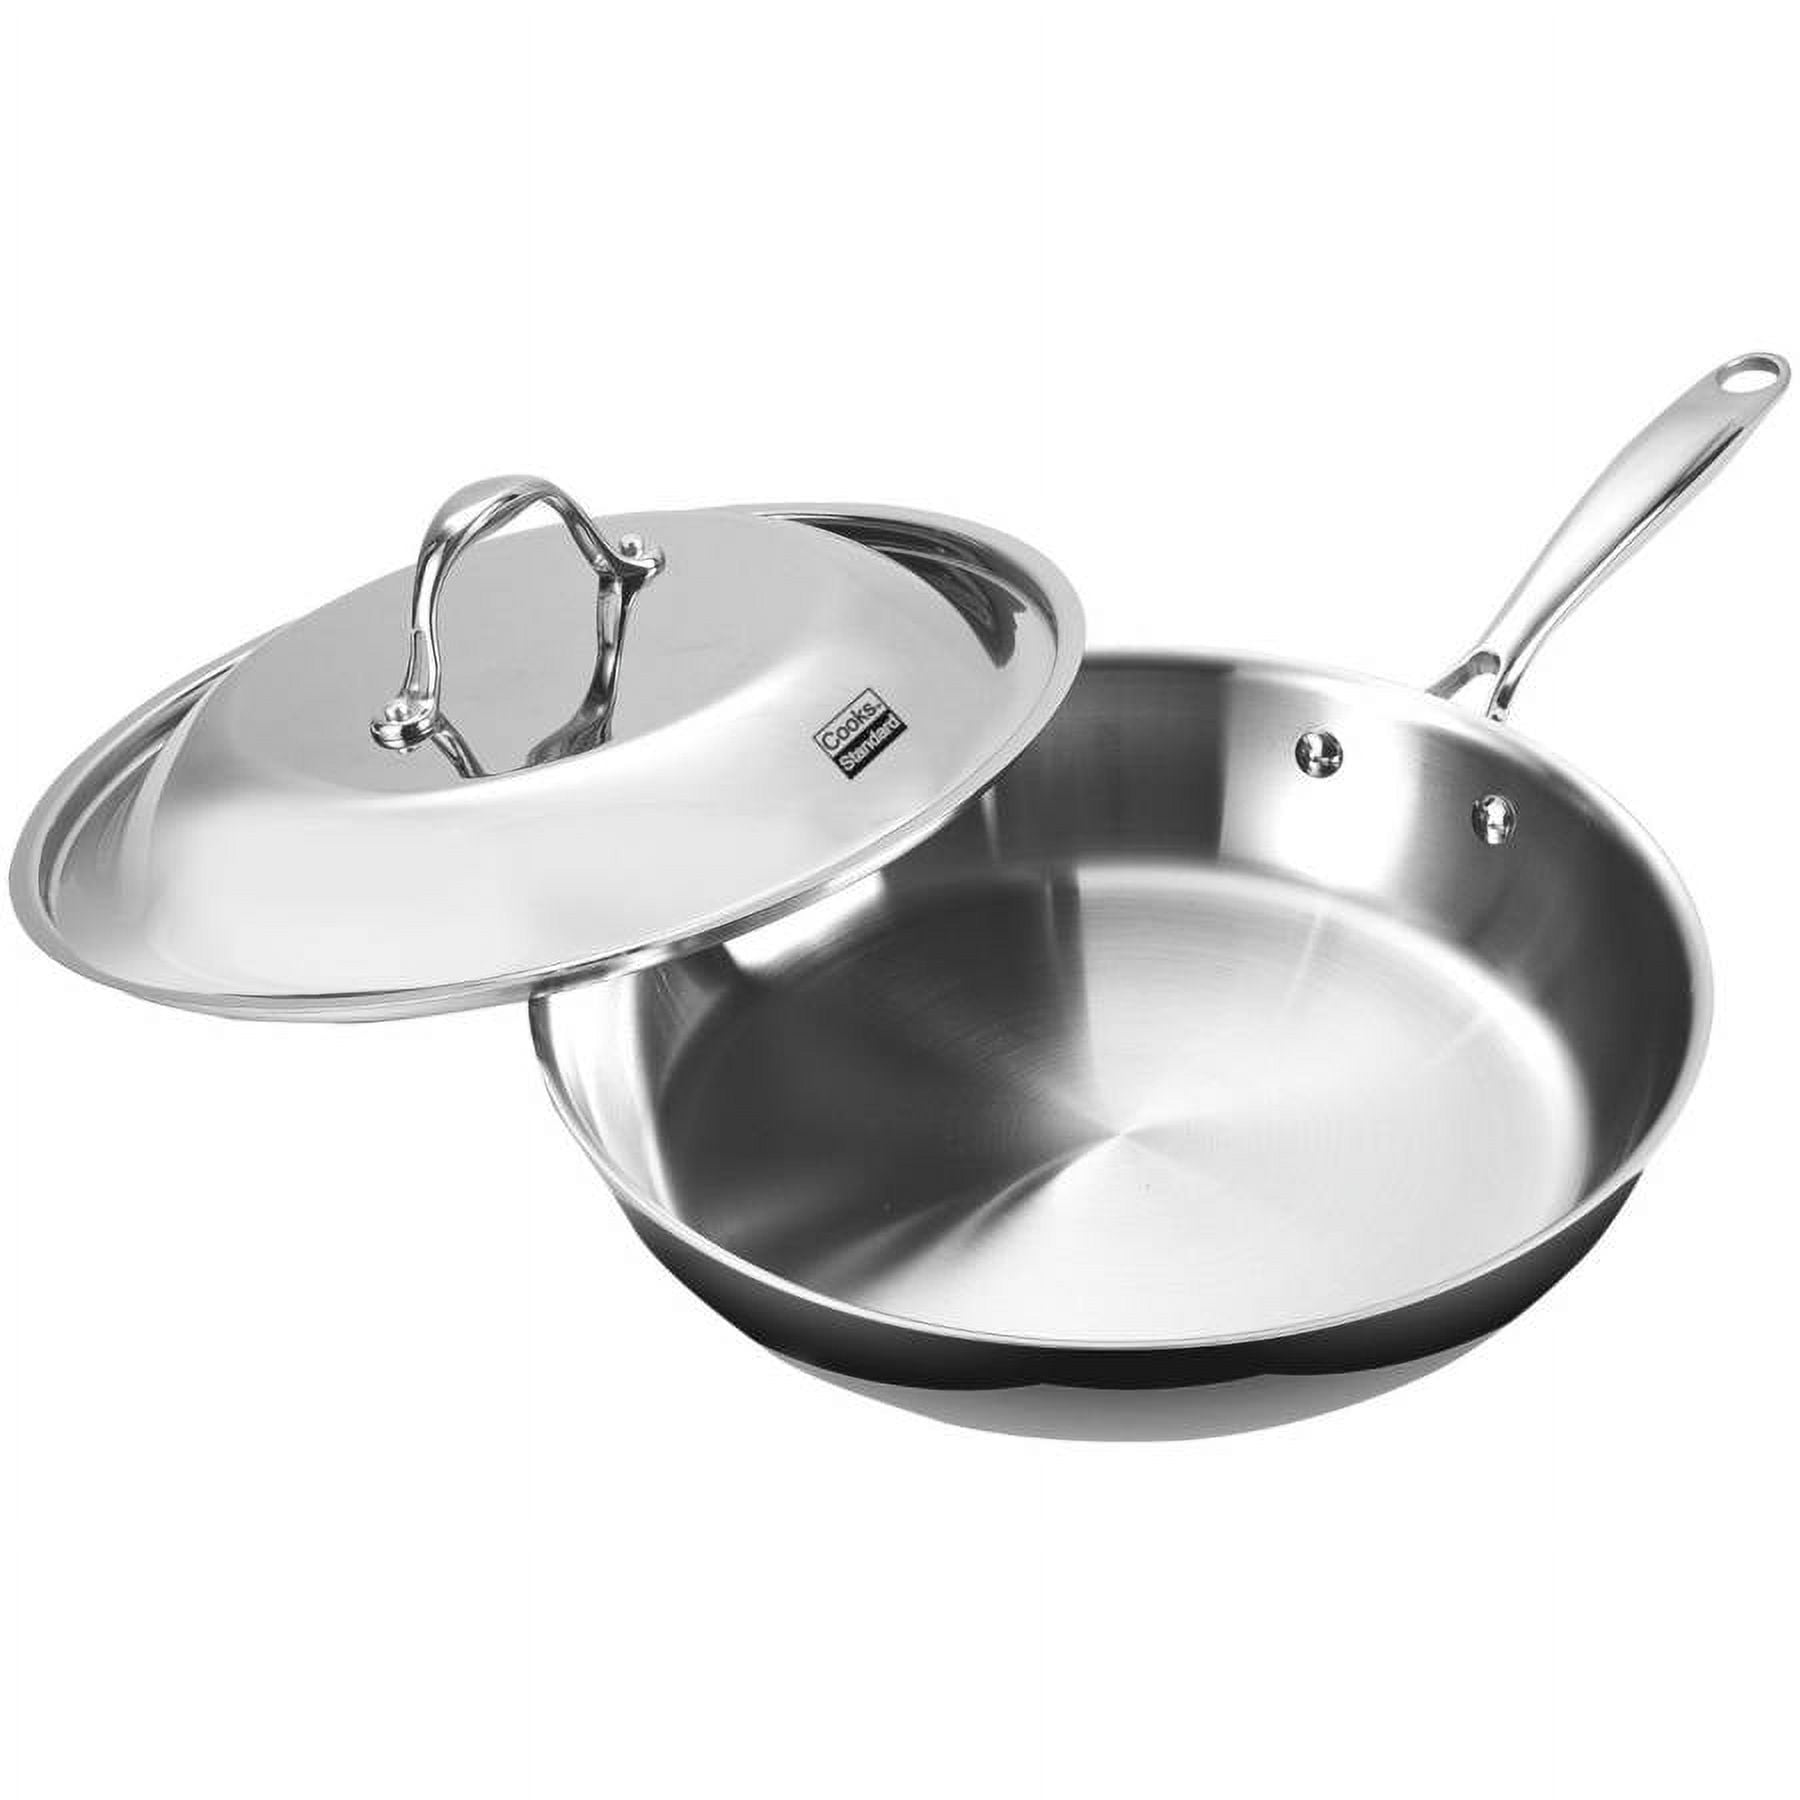 All-Clad d5 Stainless-Steel Deep Skillet, 12 1/2-Inch